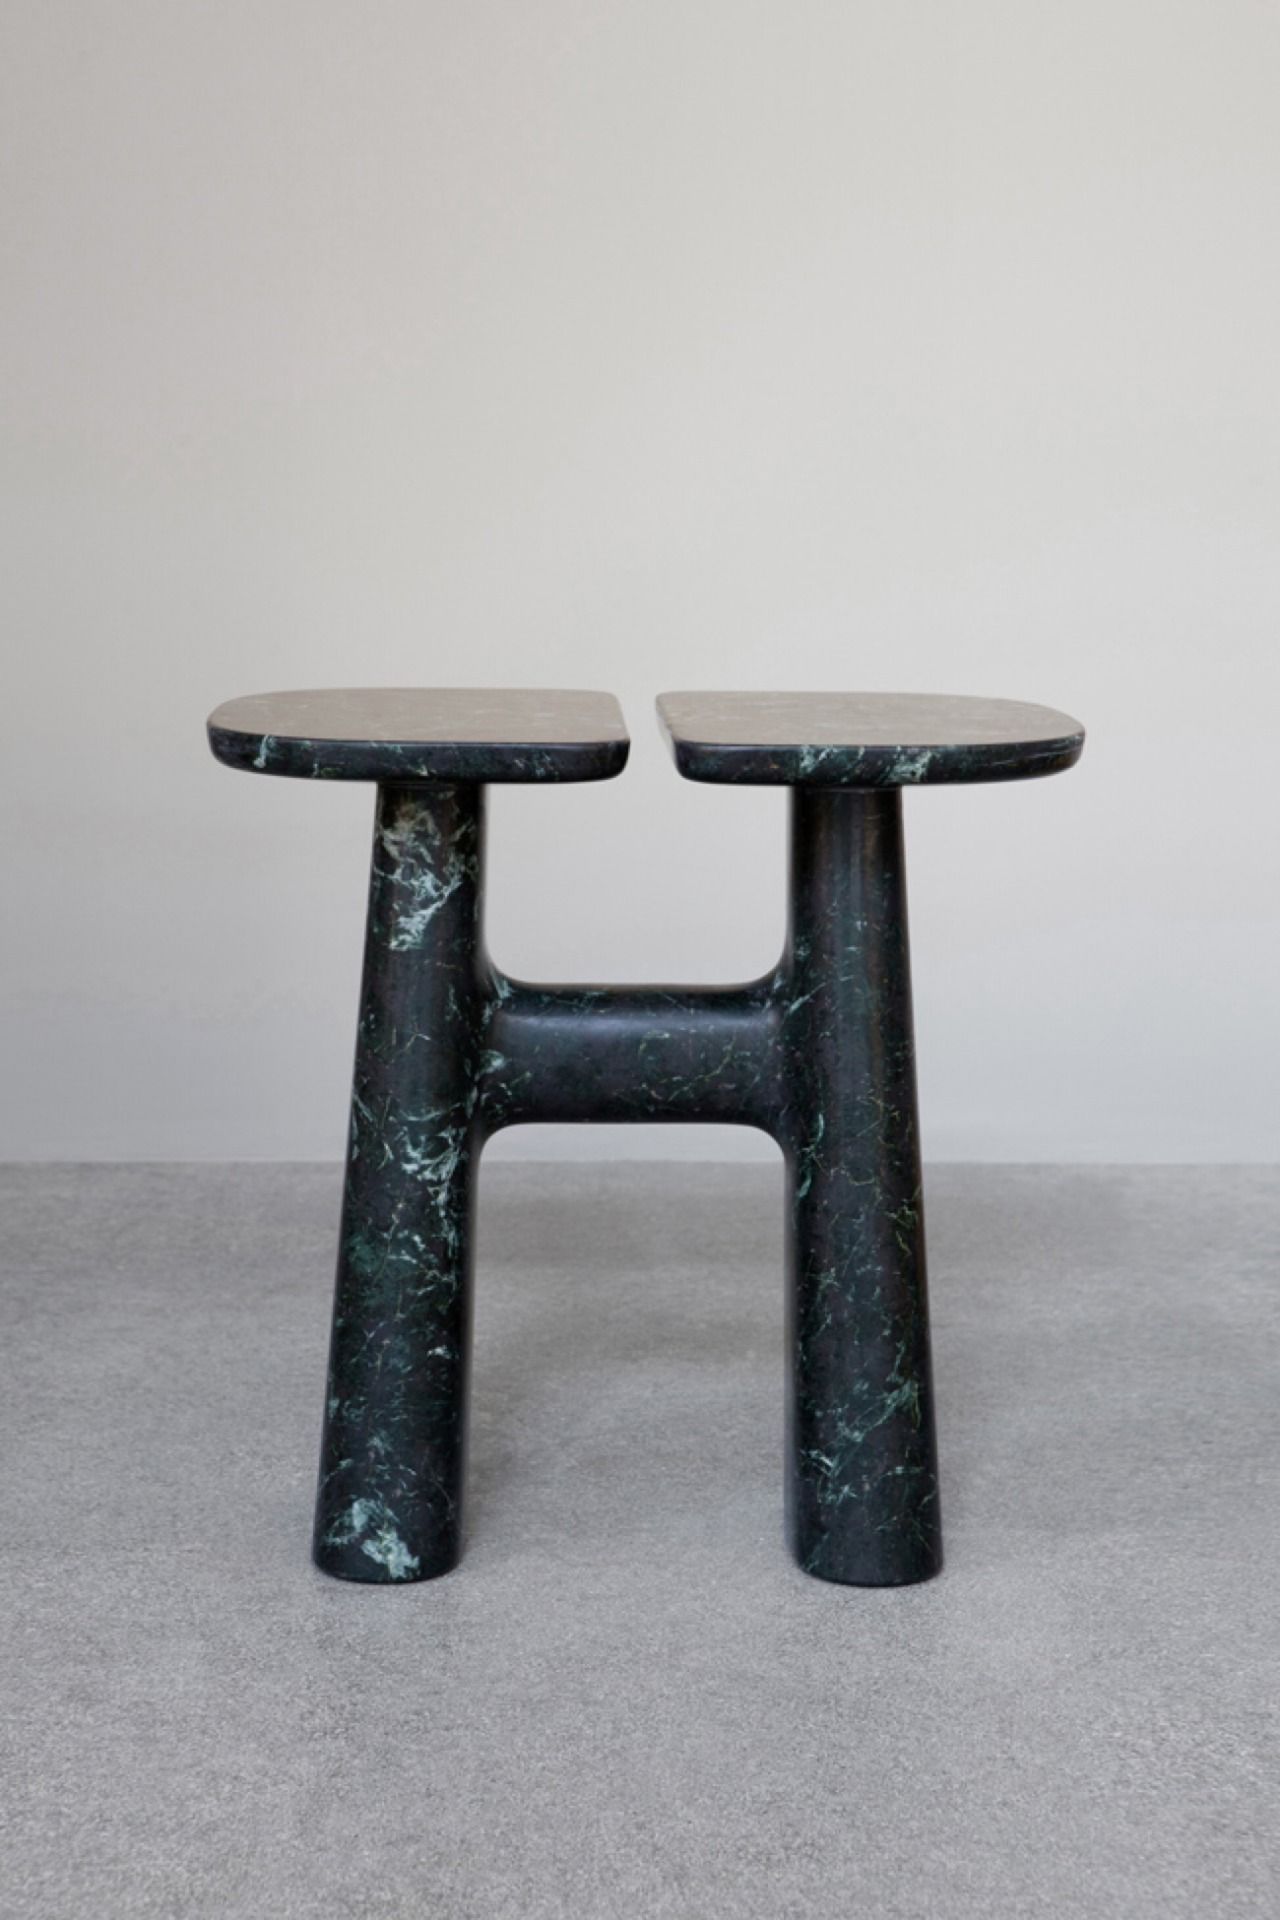 Curatedjon Gasca Life Is Full Of Beautiful Things. They Throughout Tillia Ceramic Garden Stools (Photo 19 of 25)